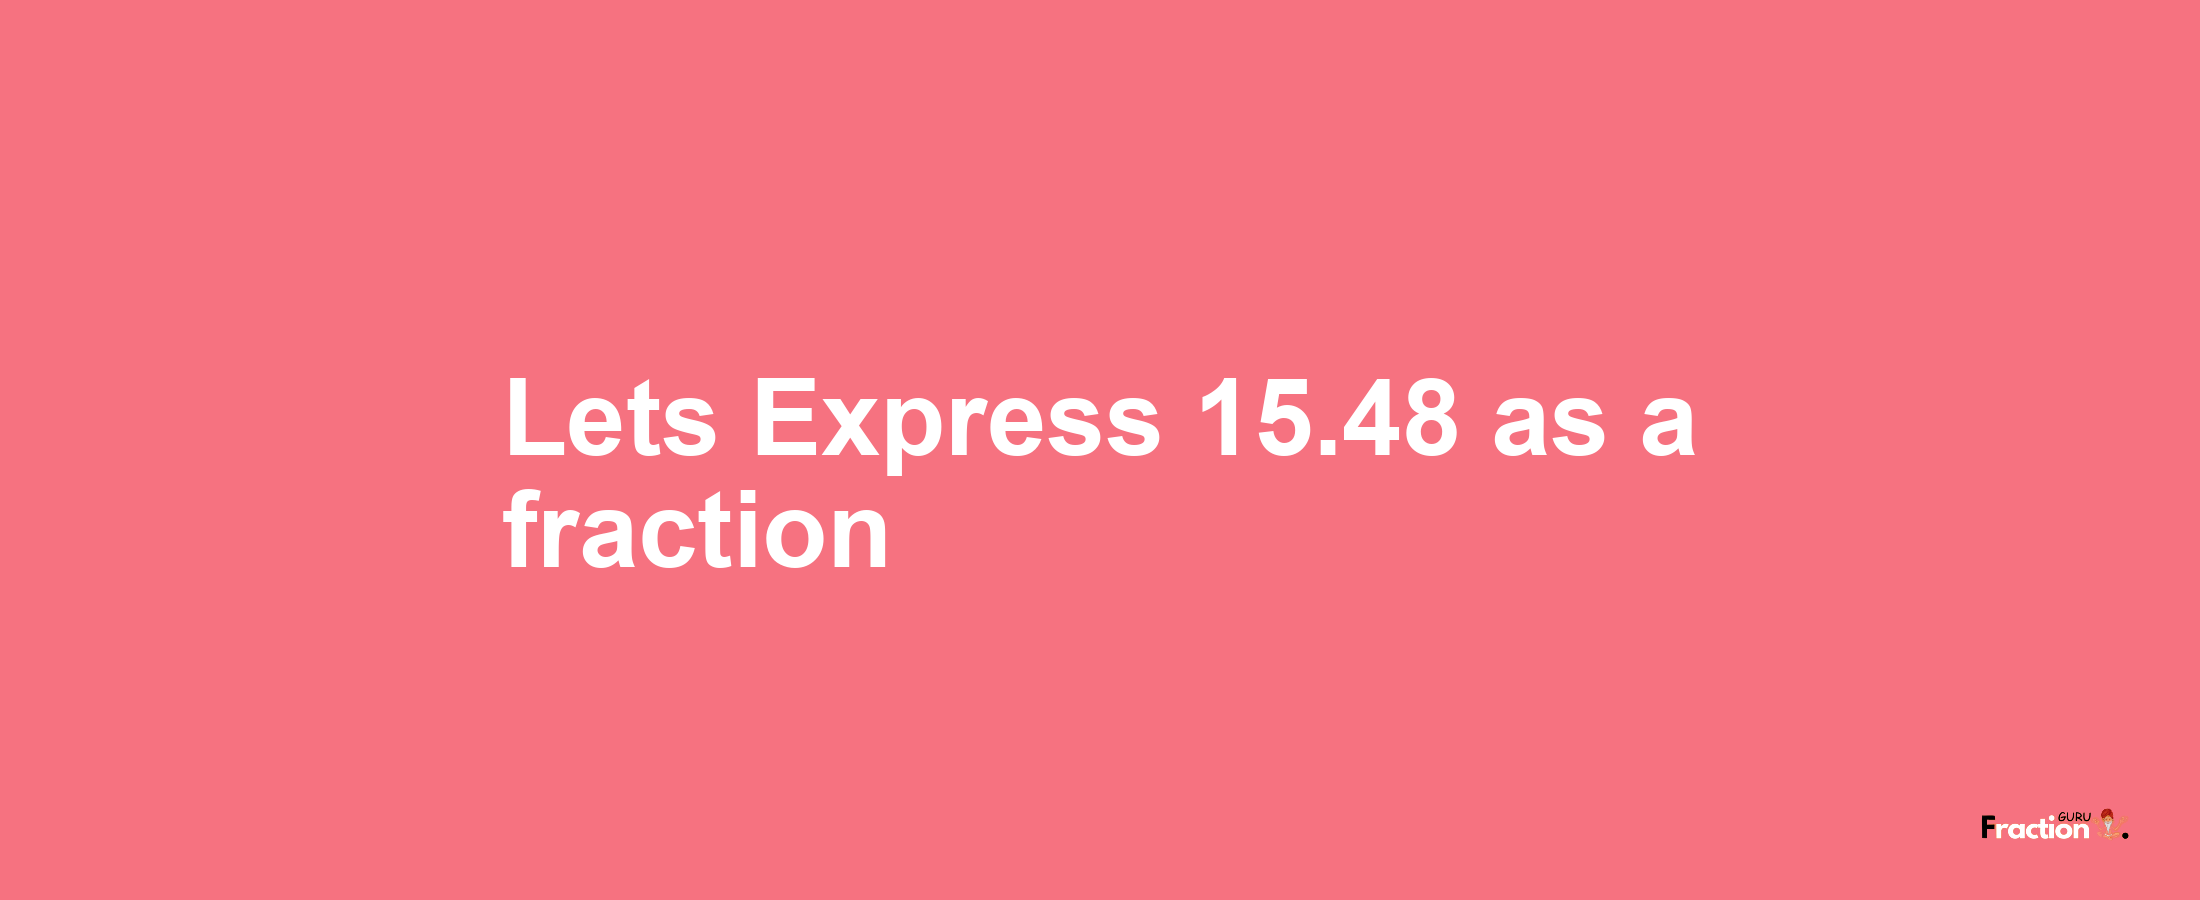 Lets Express 15.48 as afraction